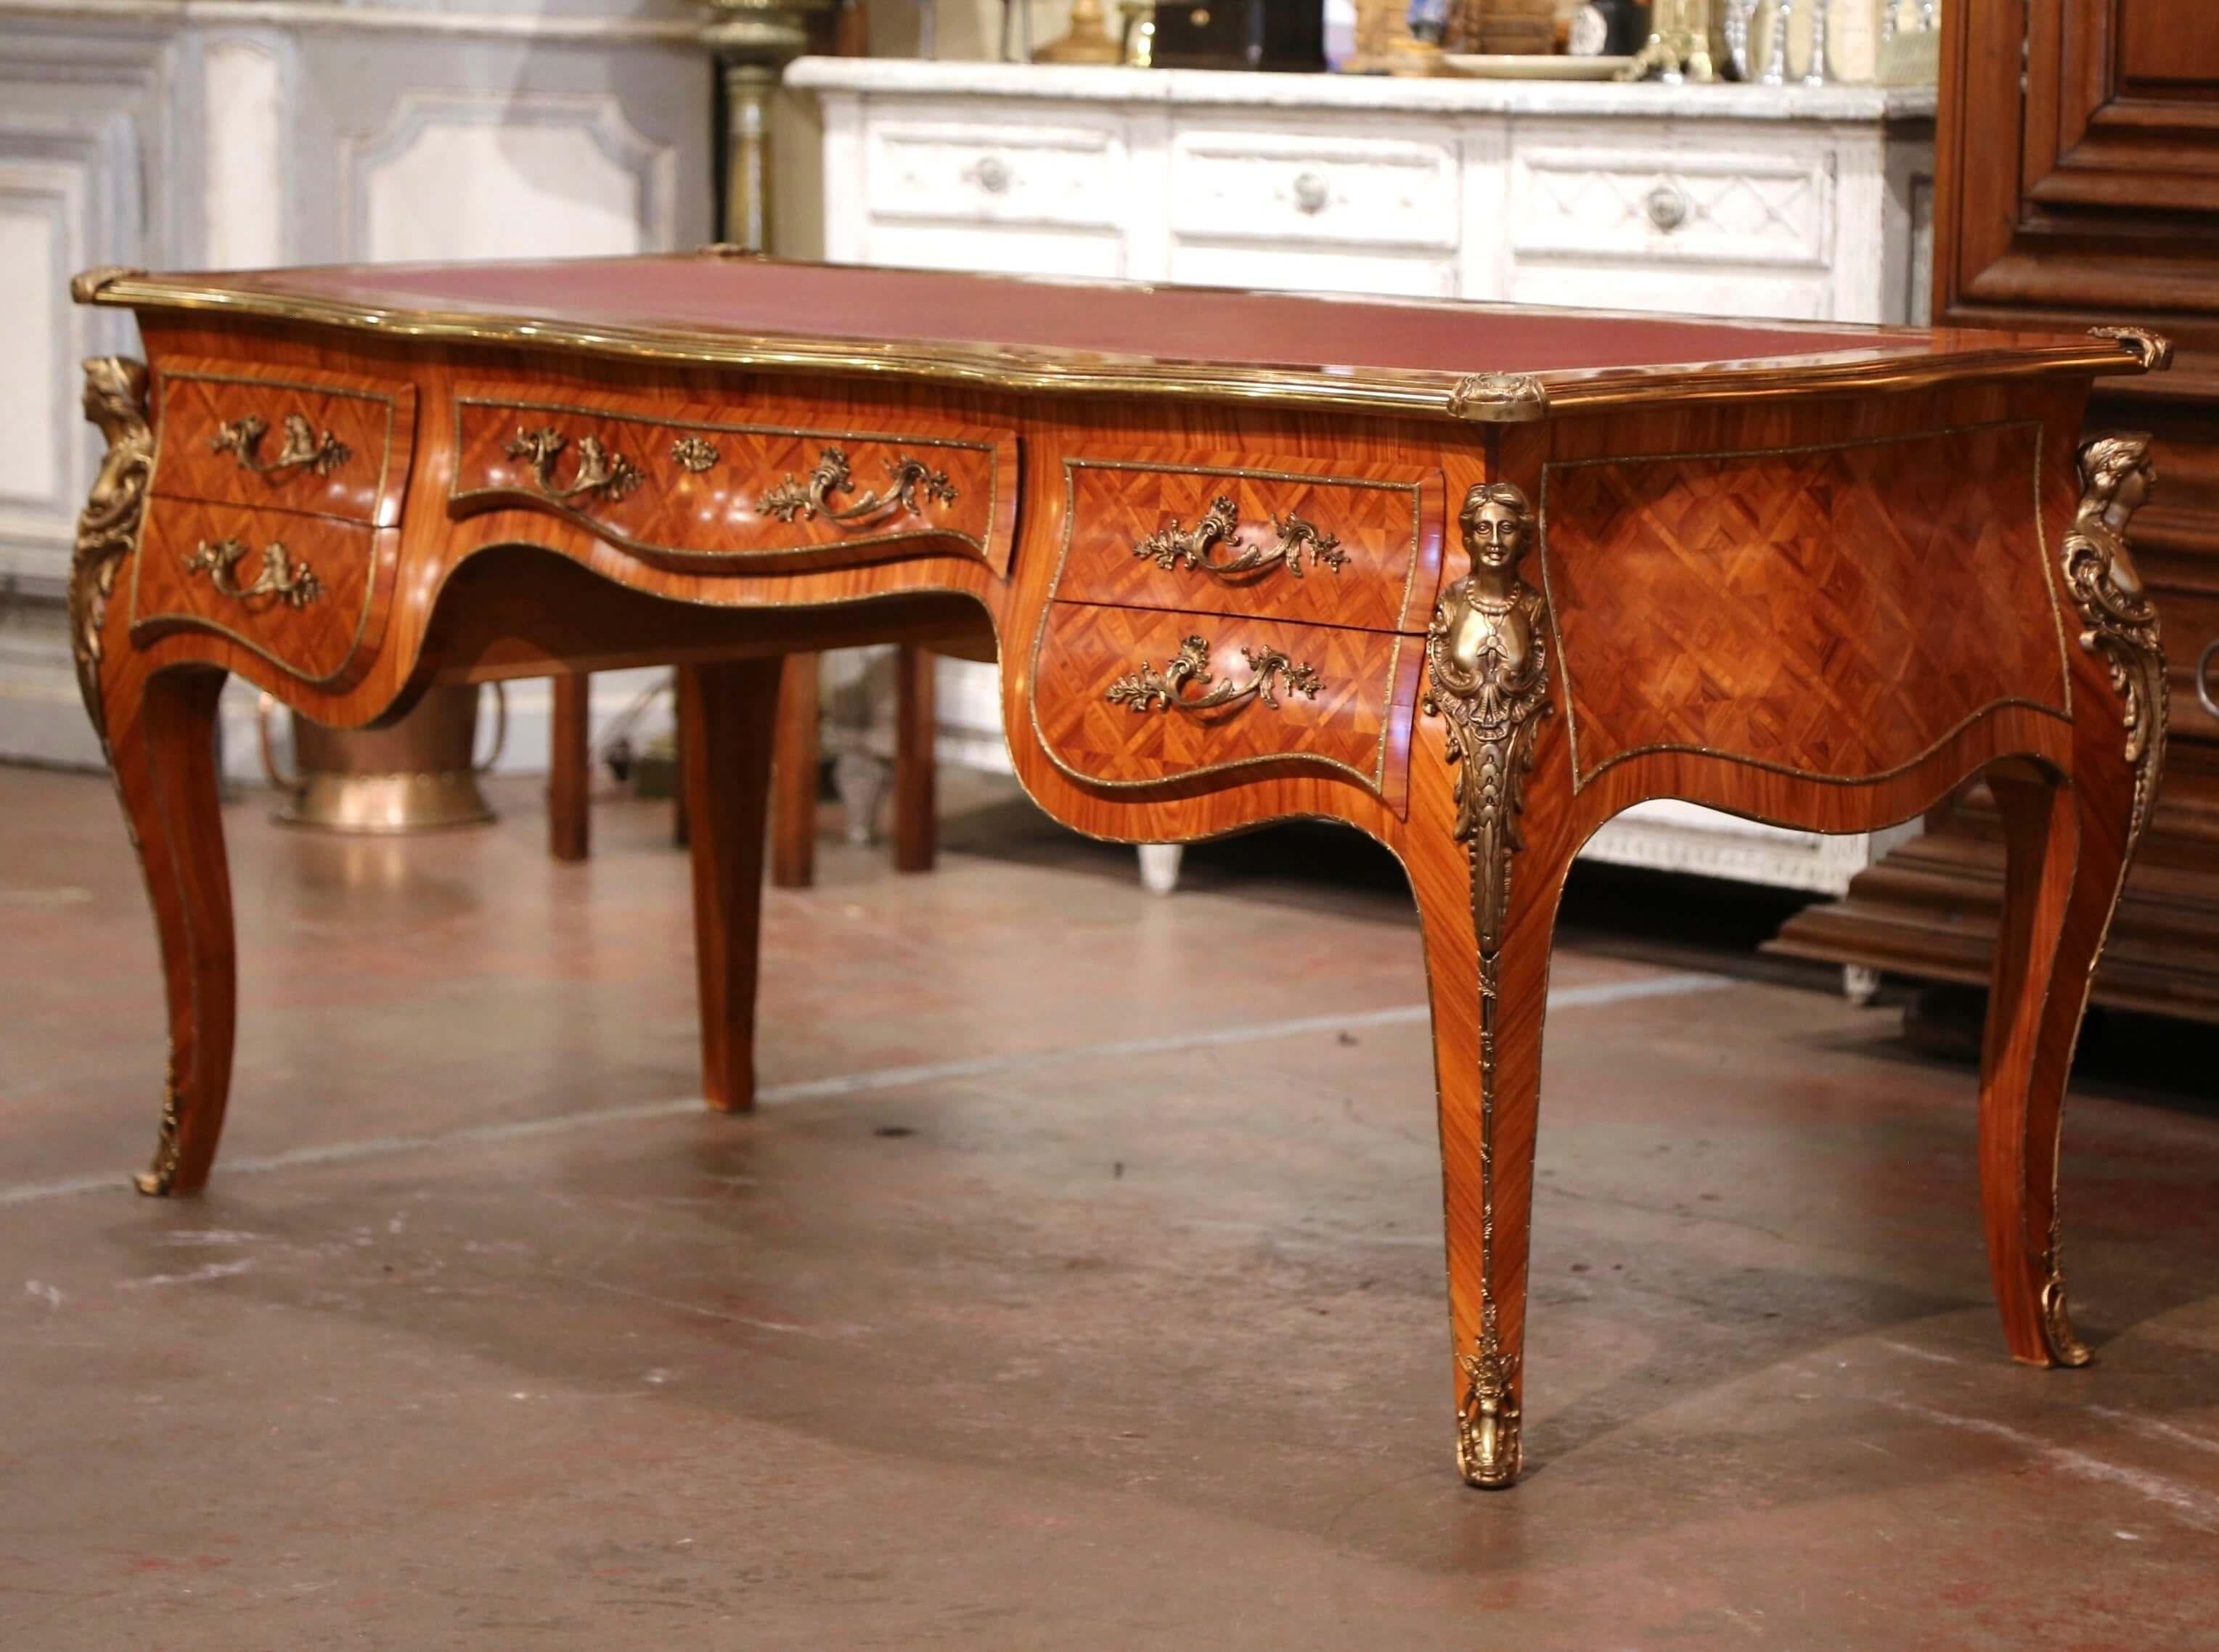 Created in Italy circa 2000 by Josephine Homes, this elegant antique desk stands on cabriole legs decorated with bronze figural ormulu mounts at the shoulders and ending with sabots over the feet. The writing table features five serpentine freeze